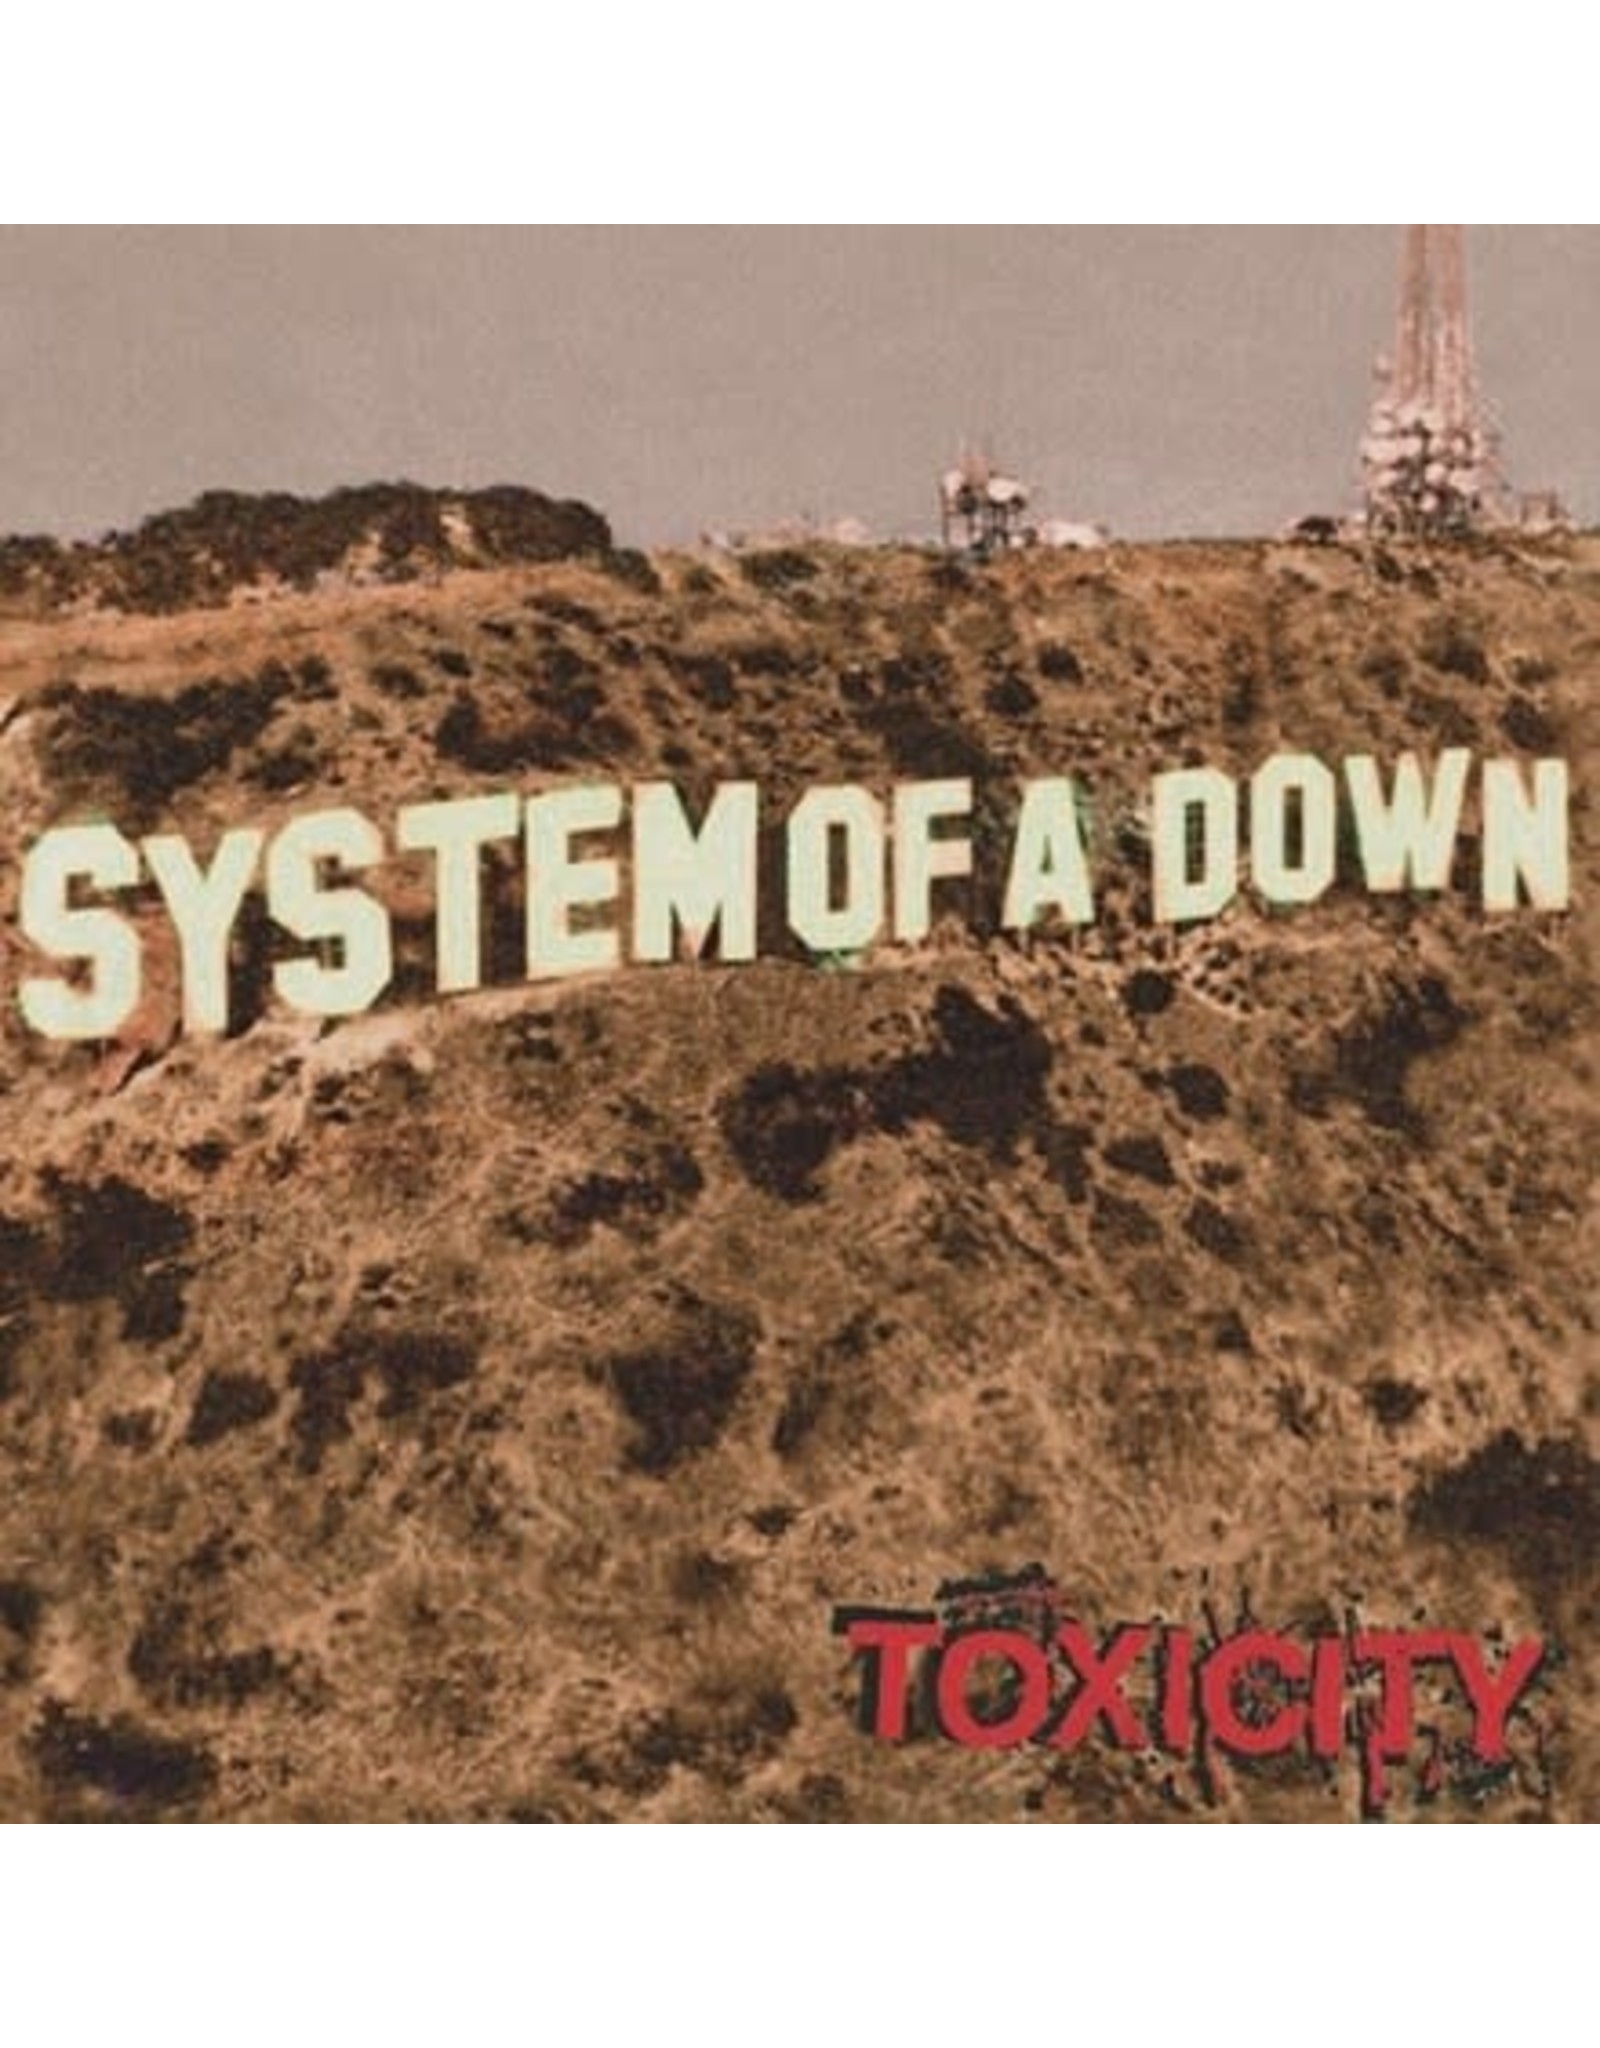 American System of a Down: Toxicity LP